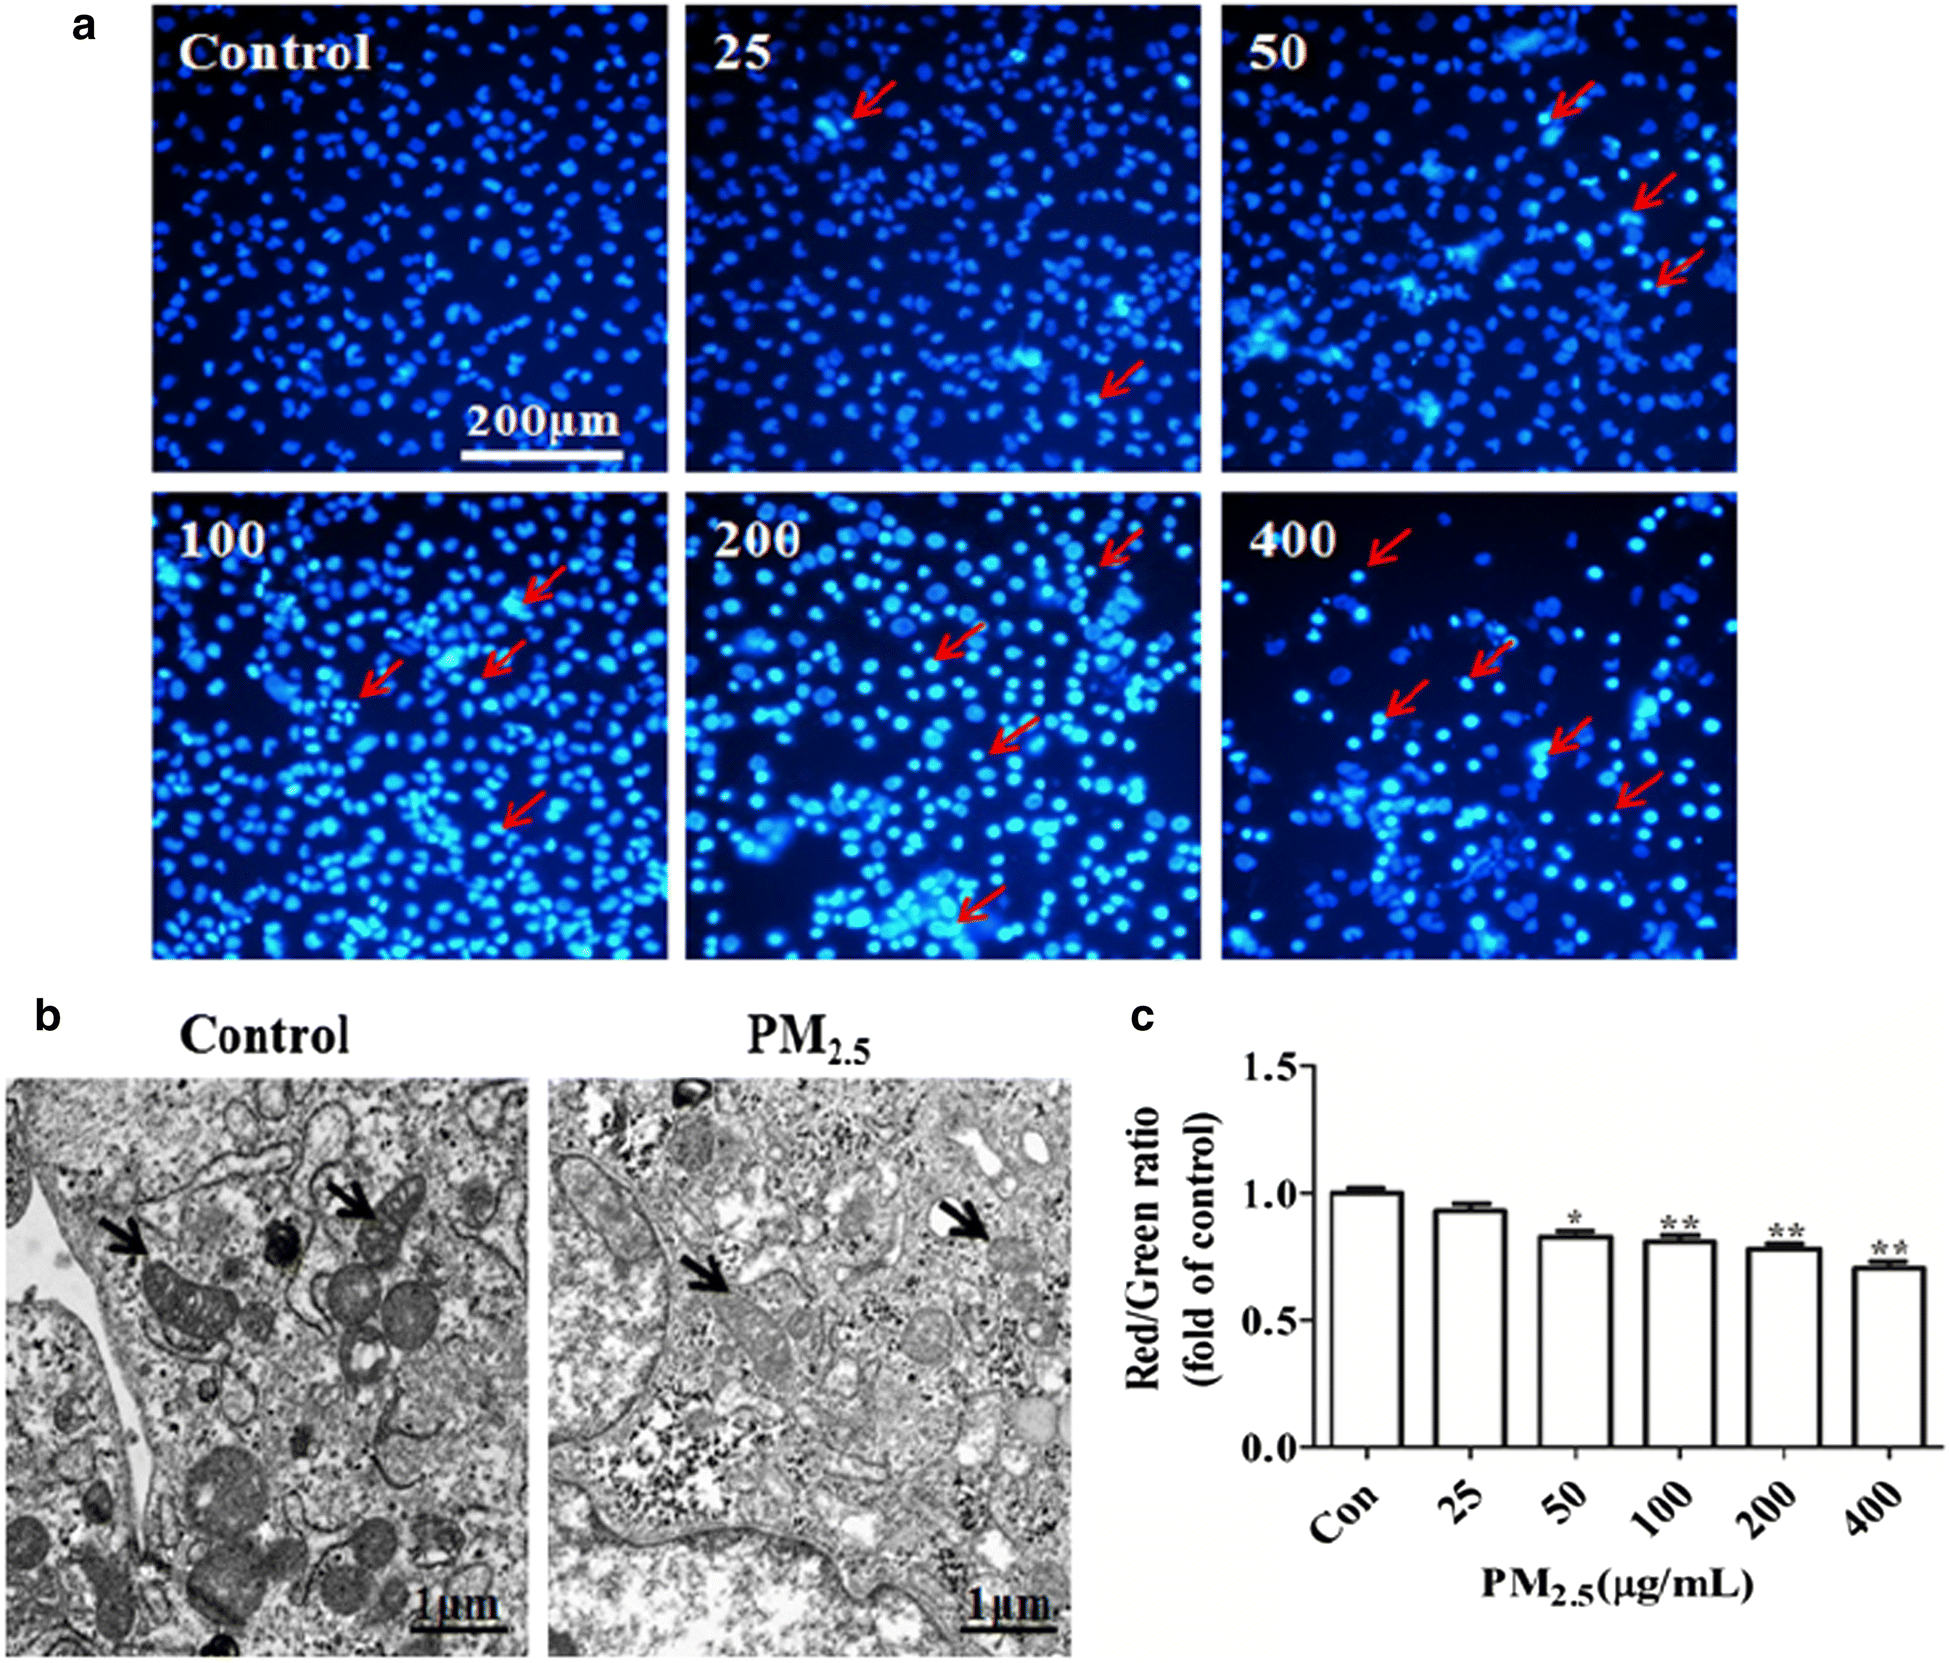 The activation of antioxidant and apoptosis pathways involved in damage of  human proximal tubule epithelial cells by PM2.5 exposure | Environmental  Sciences Europe | Full Text